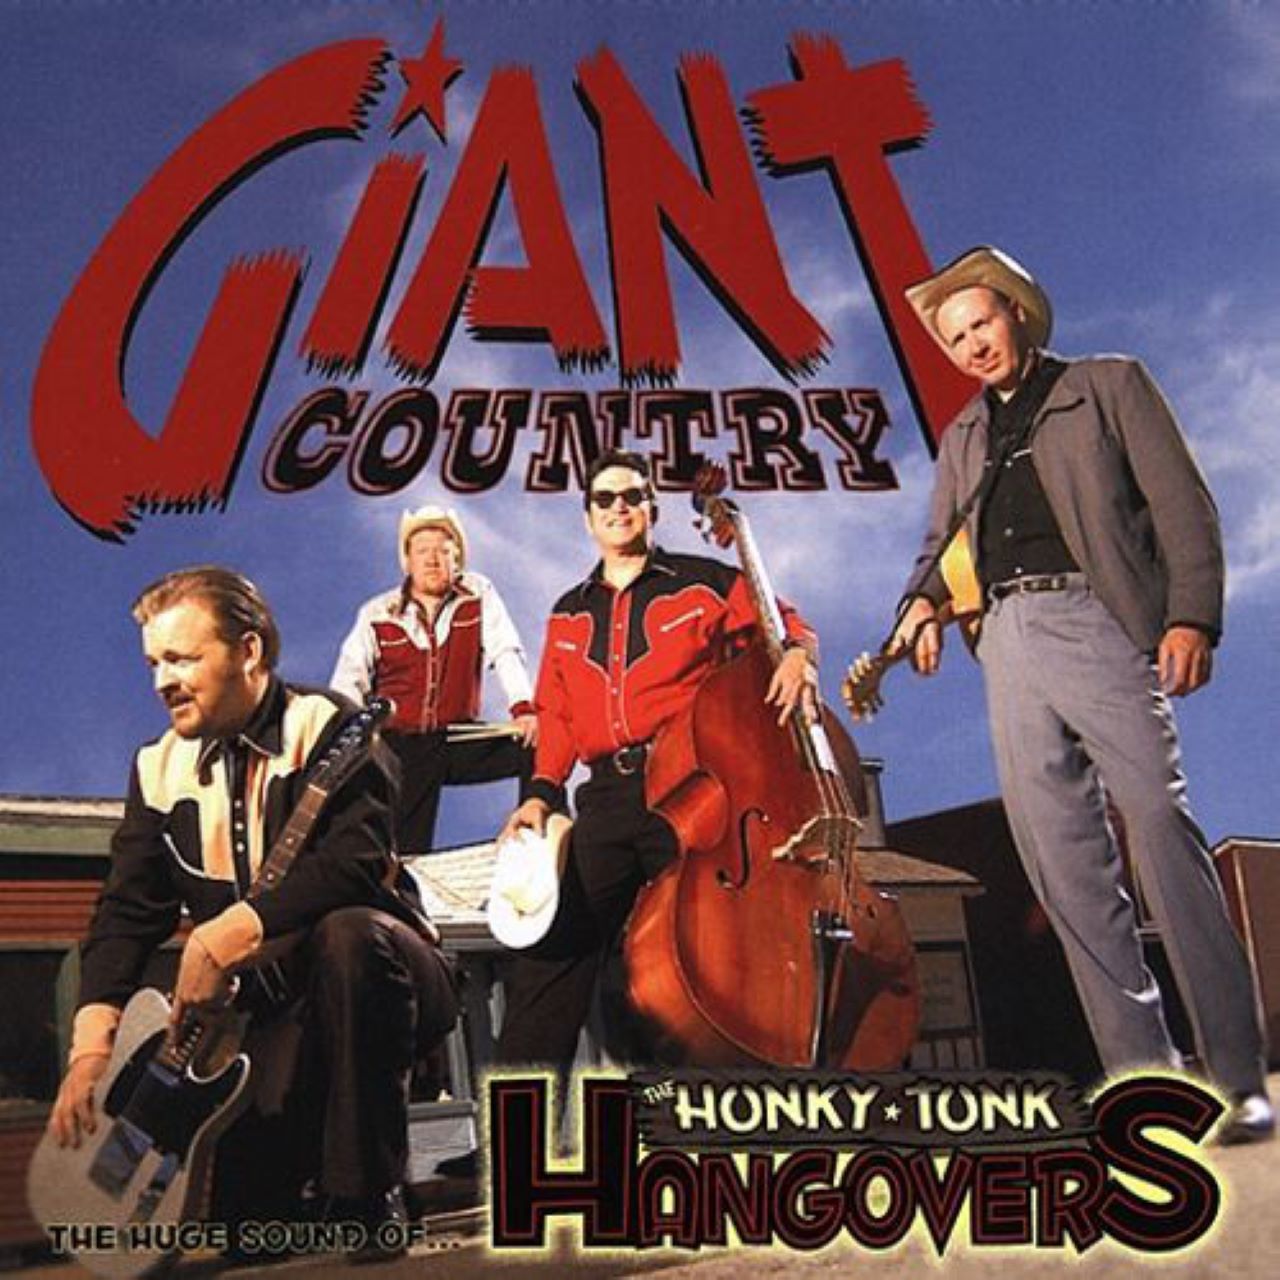 Honky-Tonk Hangovers - Giant Country cover album